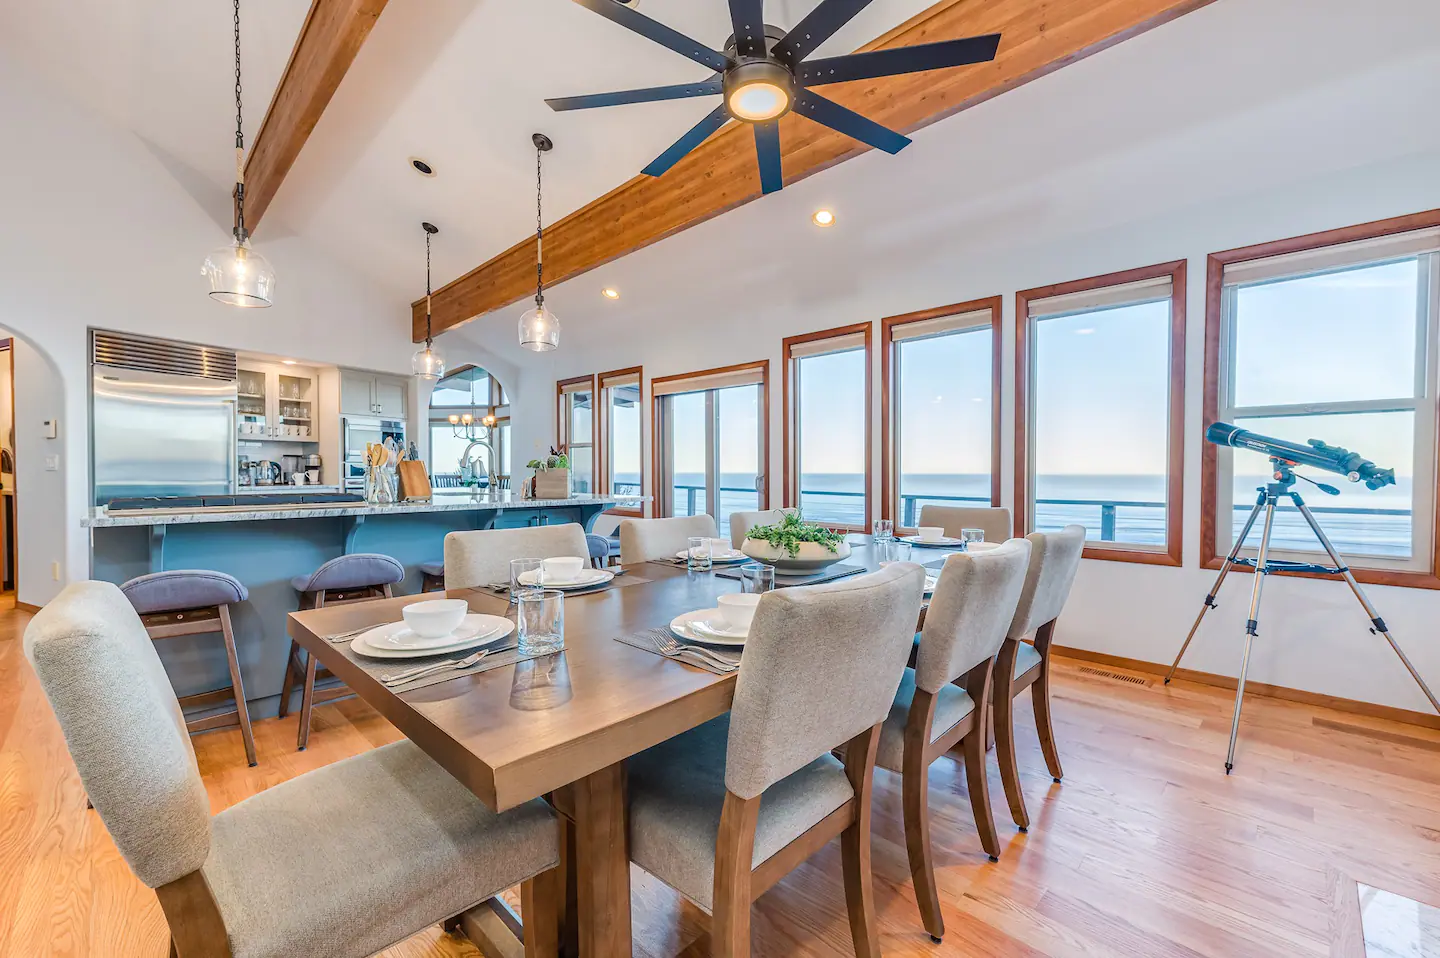 Brand new dining room and remodeled kitchen invite you to enjoy dinner on the table for 8 or the spacious granite island with seating for another 8.
